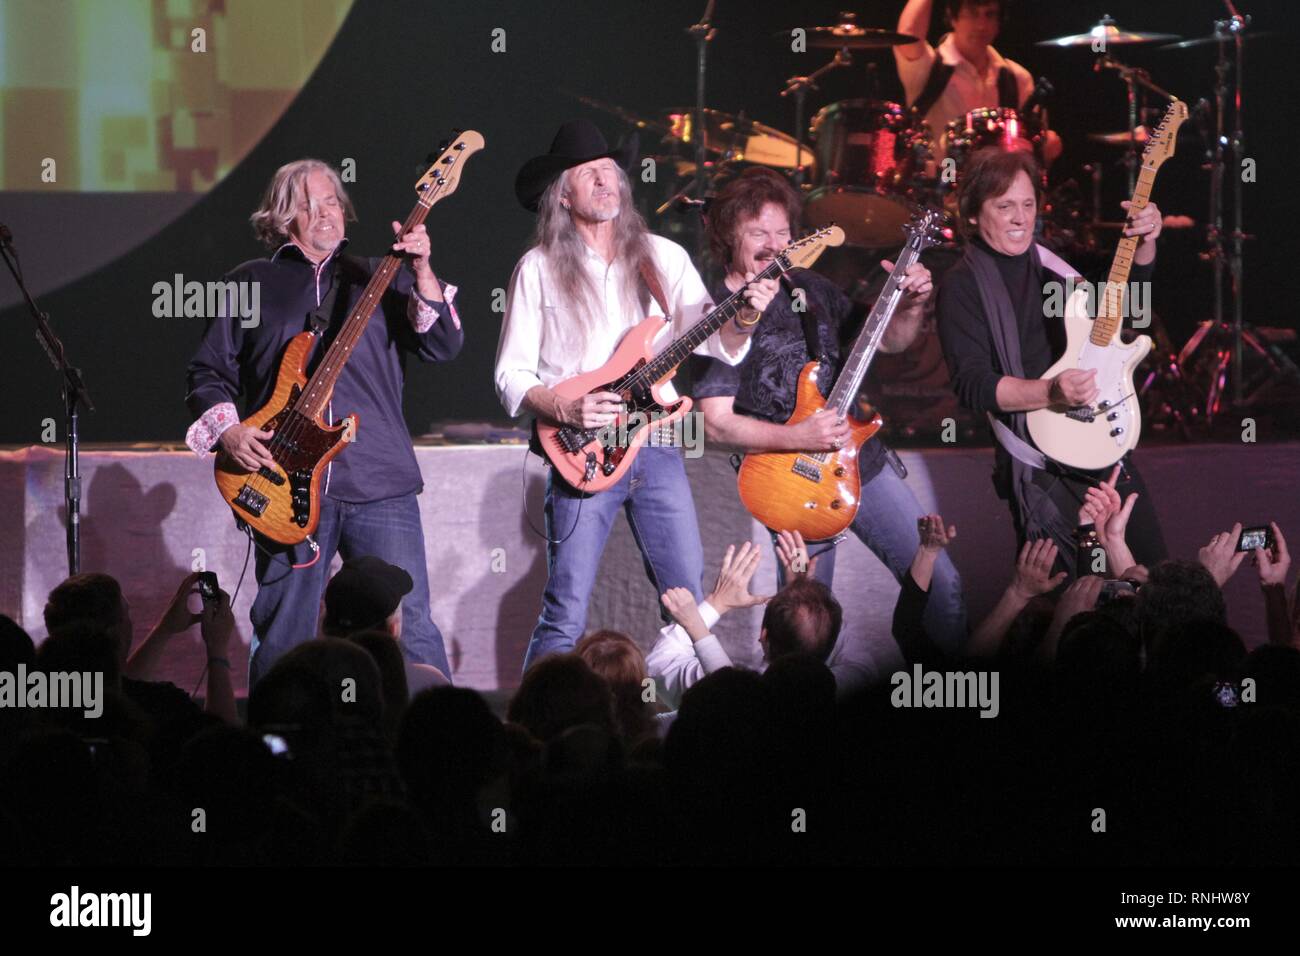 The Doobie Brothers are shown performing on stage during a 'live' concert appearance. Stock Photo